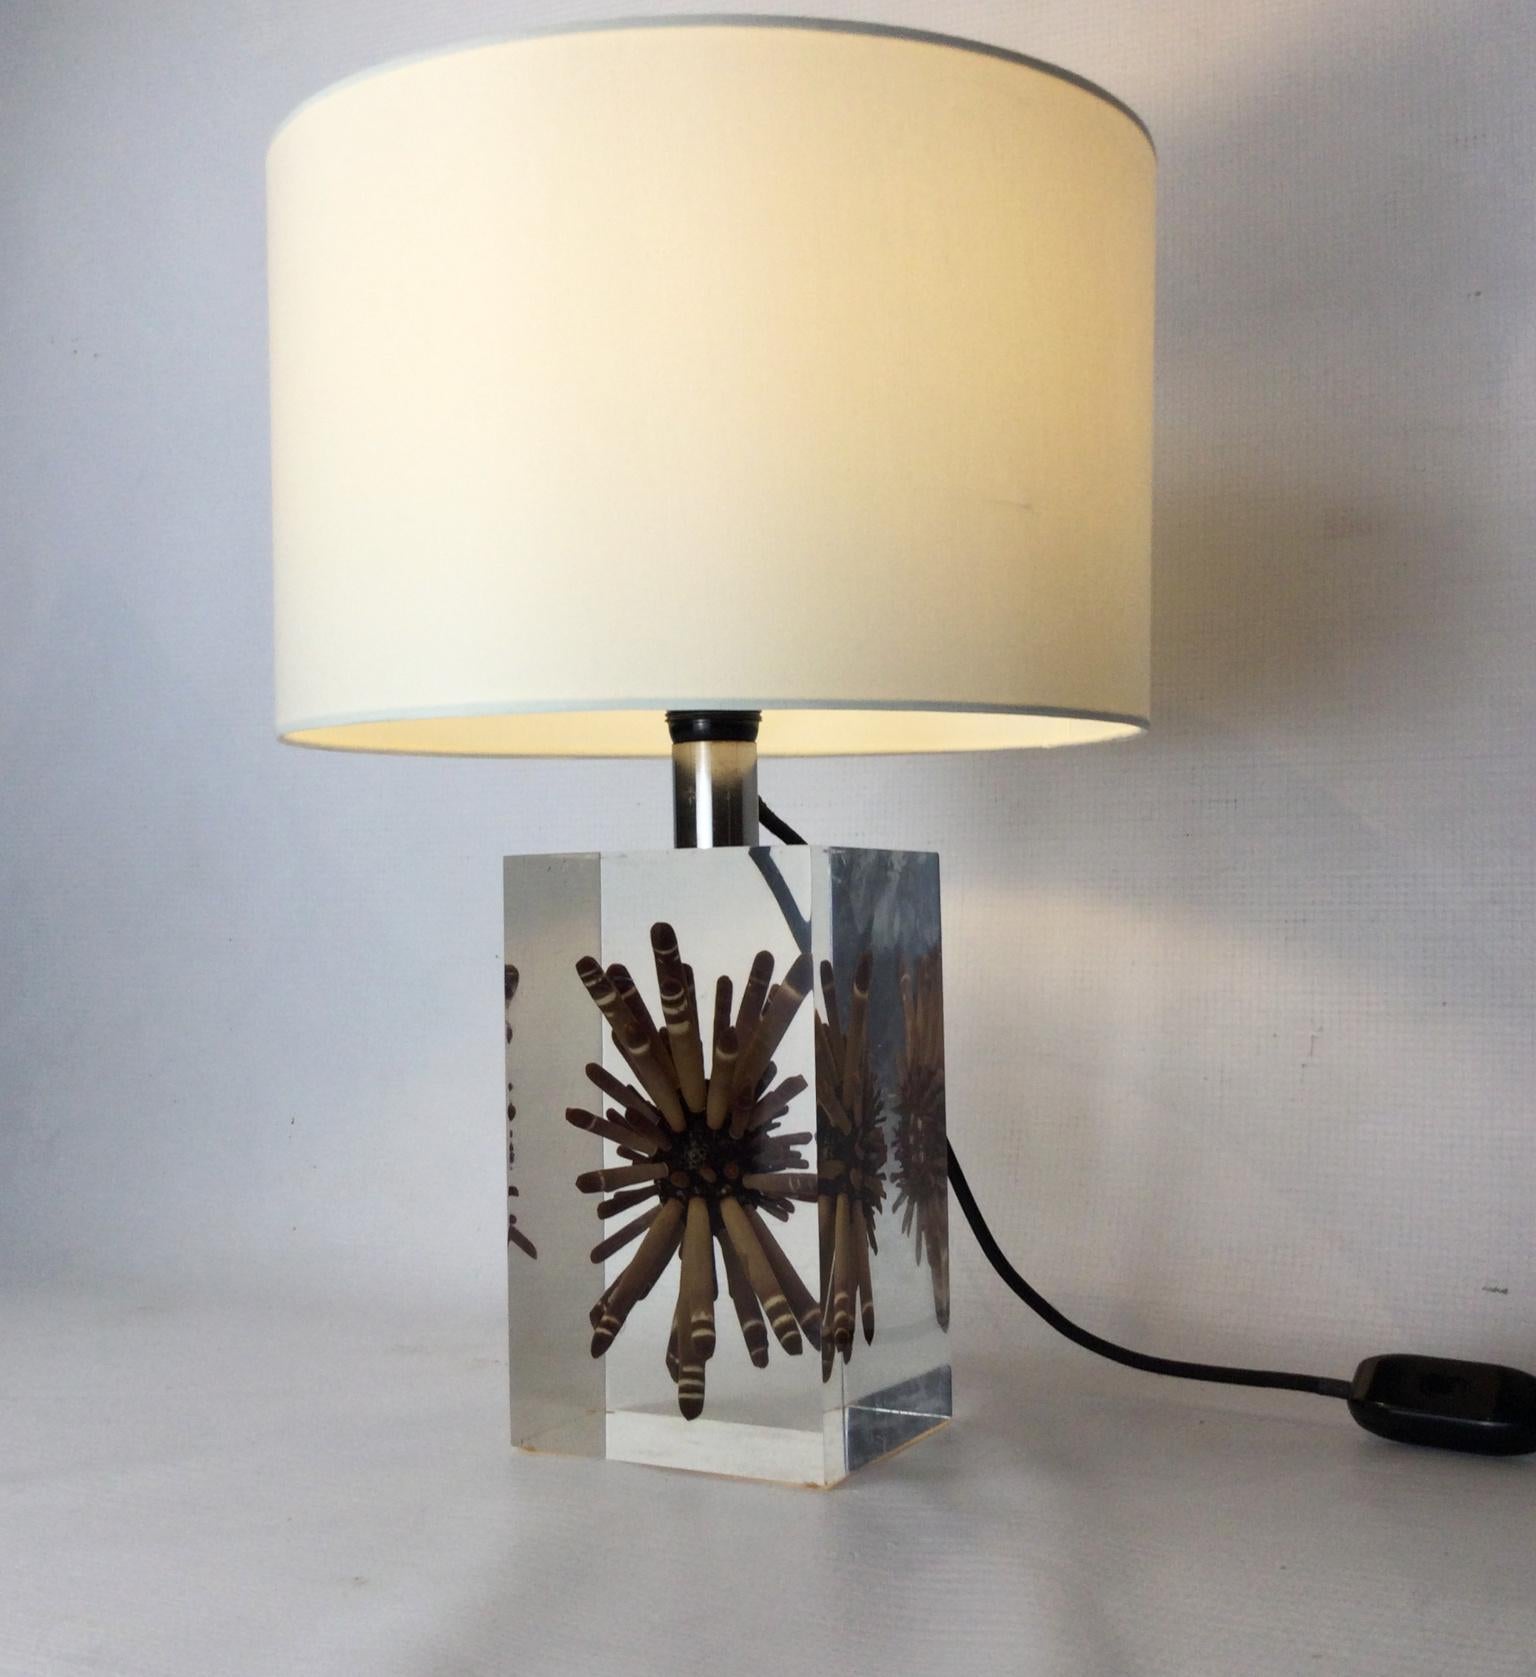 Pierre Giraudon 1970s Large Resin Table Lamp with Tropical Ursin Inclusion For Sale 6